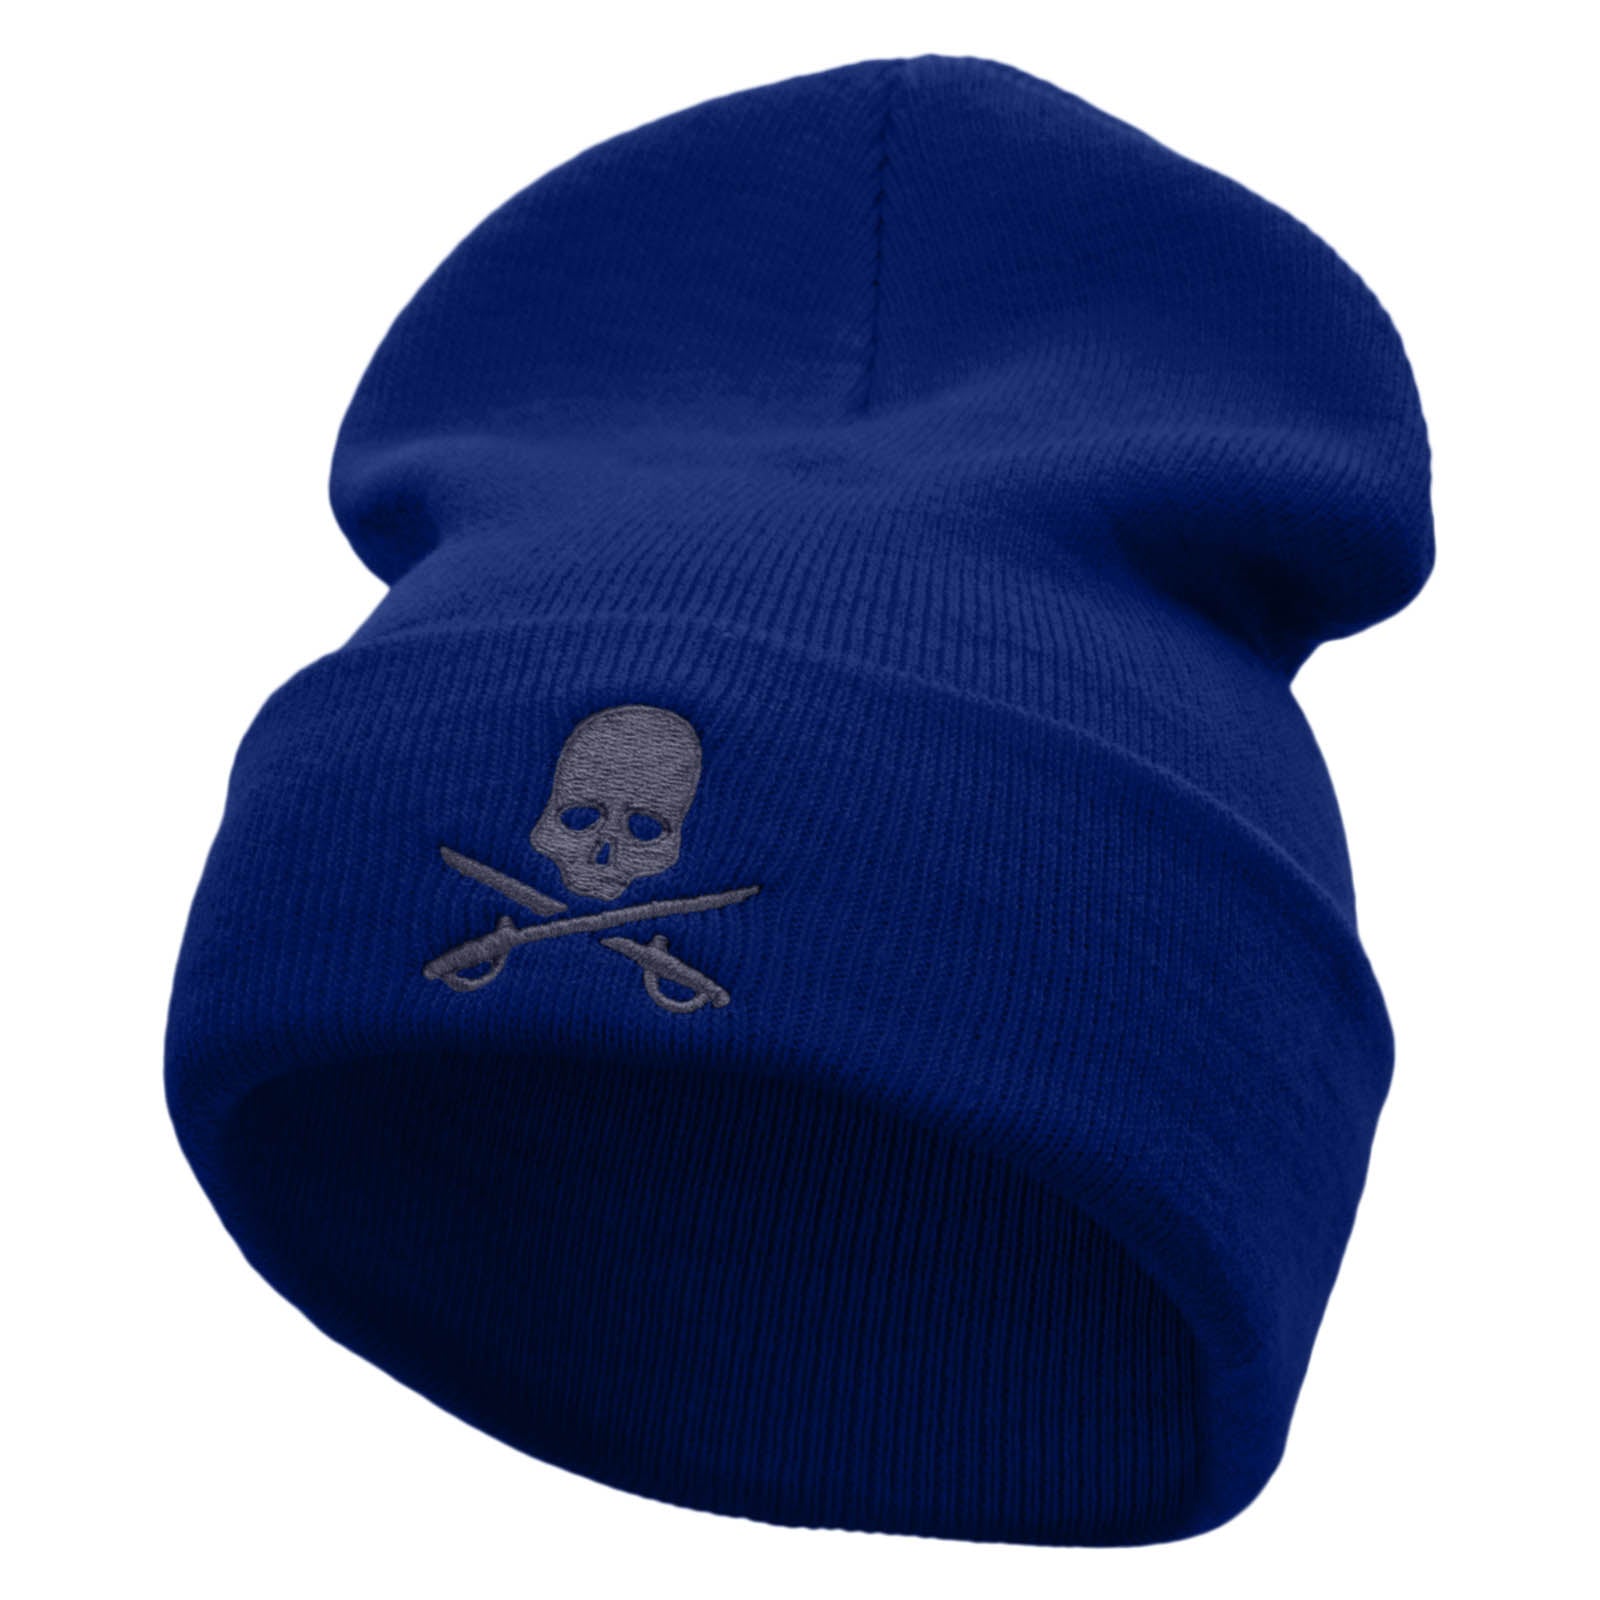 Skull And Sword Embroidered 12 Inch Long Knitted Beanie - Royal OSFM